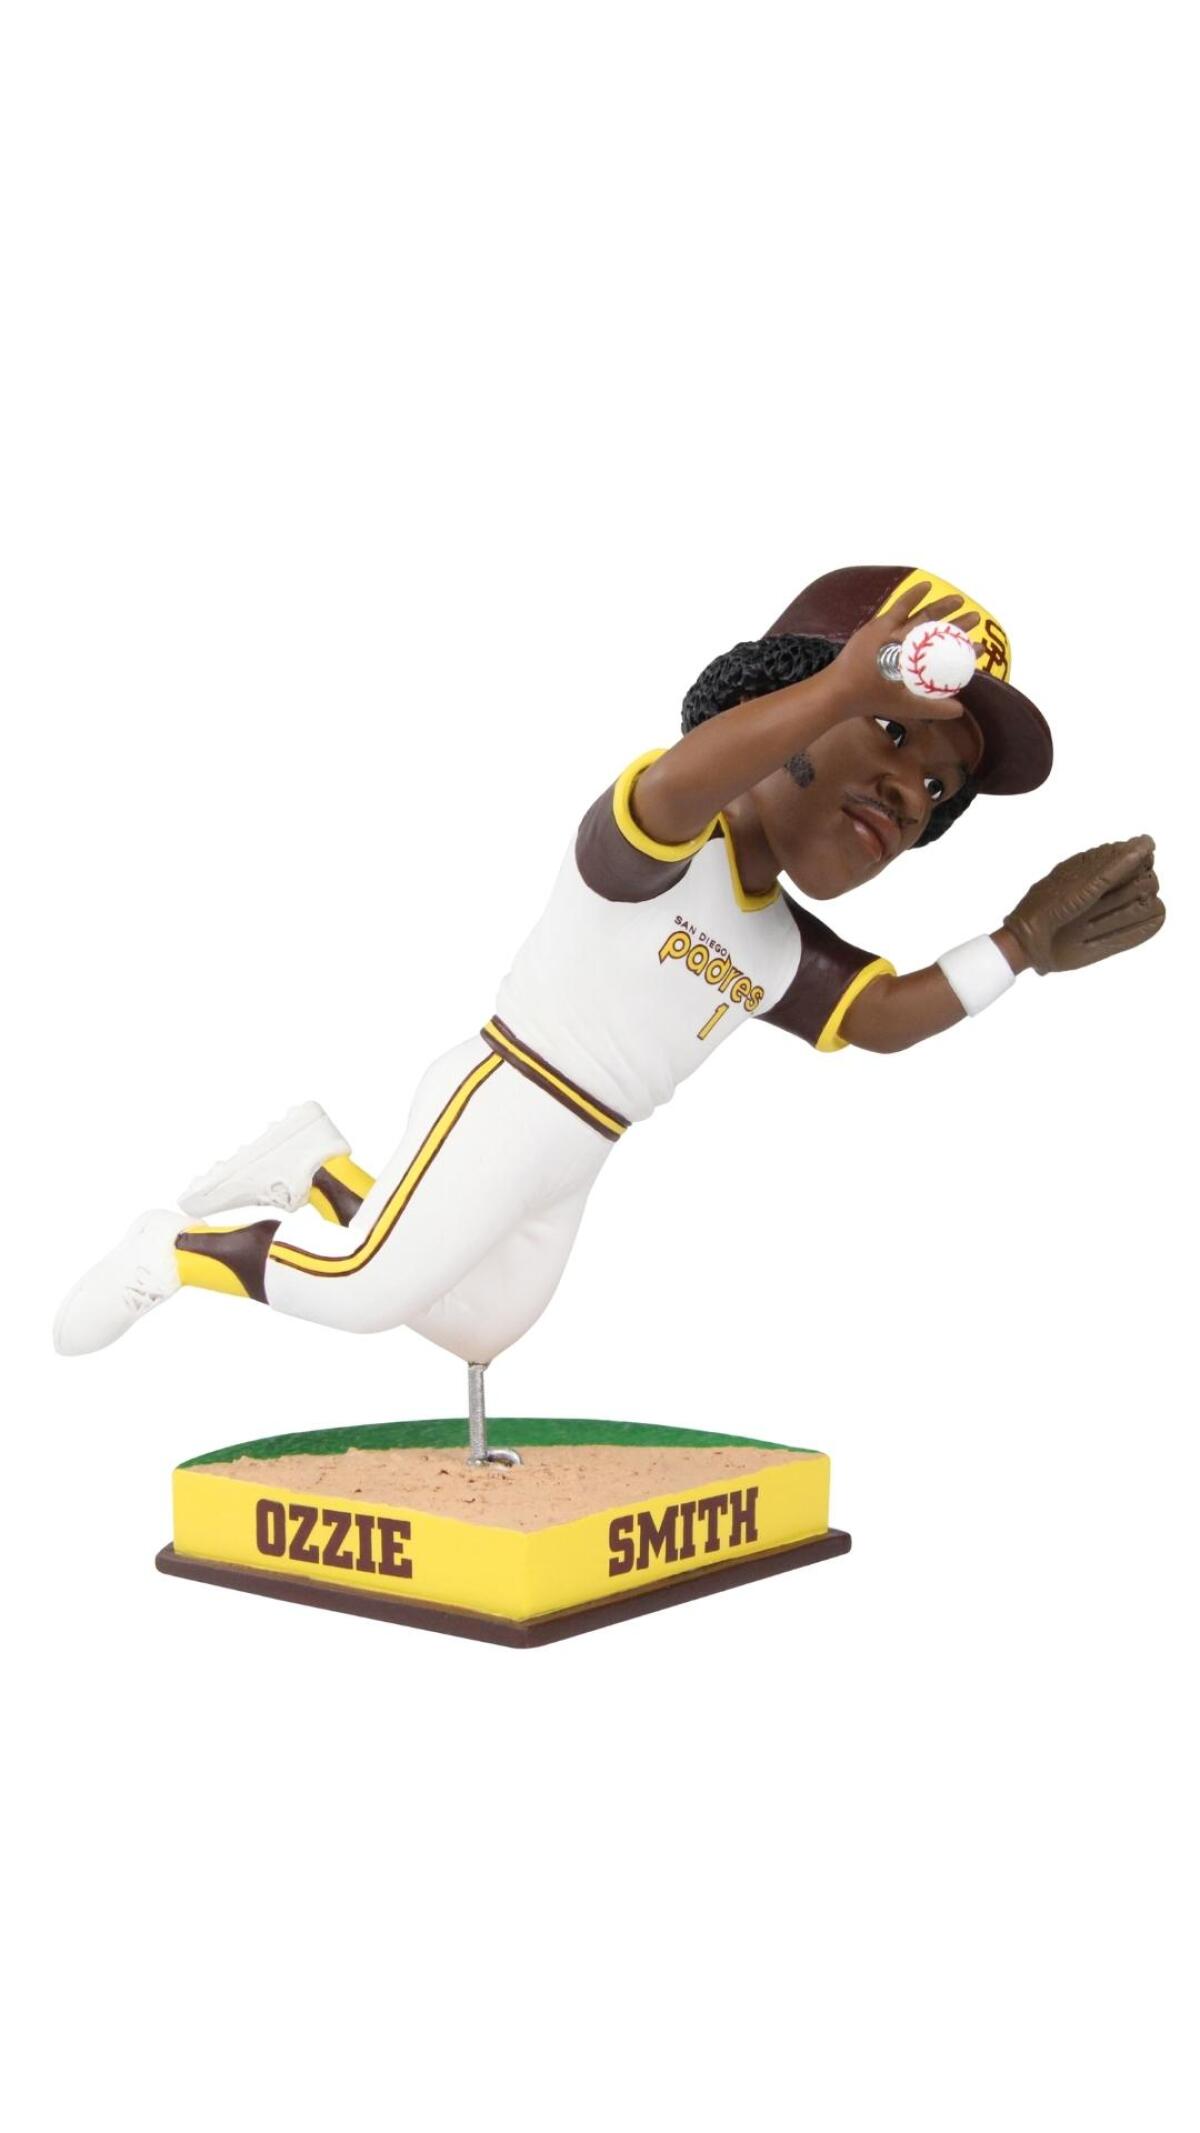 Ozzie Smith diving barehanded play 1978 Padres bobblehead - The San Diego  Union-Tribune